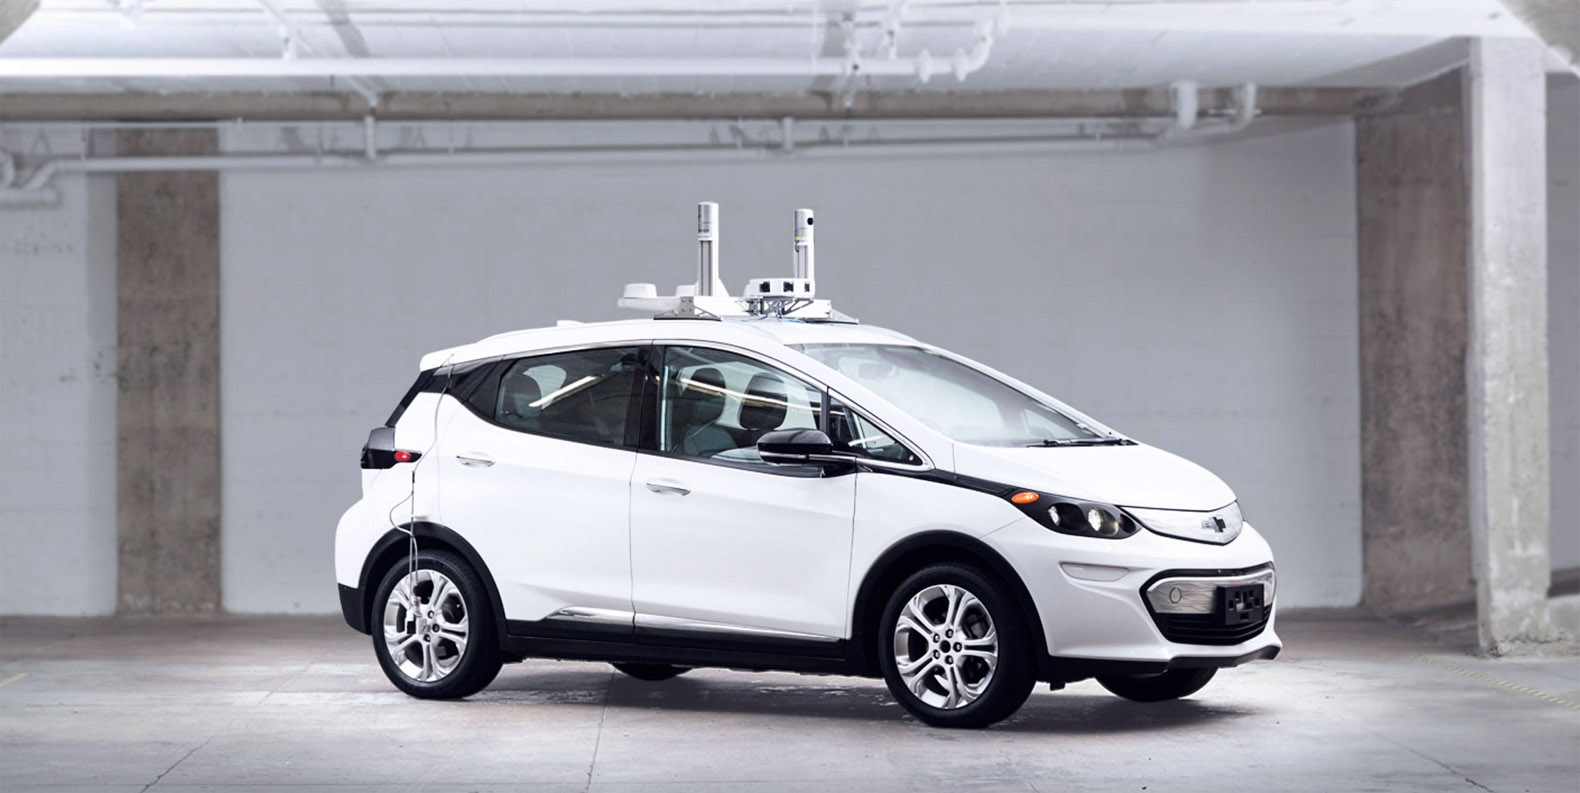 GM Chevy Bolt self-driving cars built and tested in Michigan